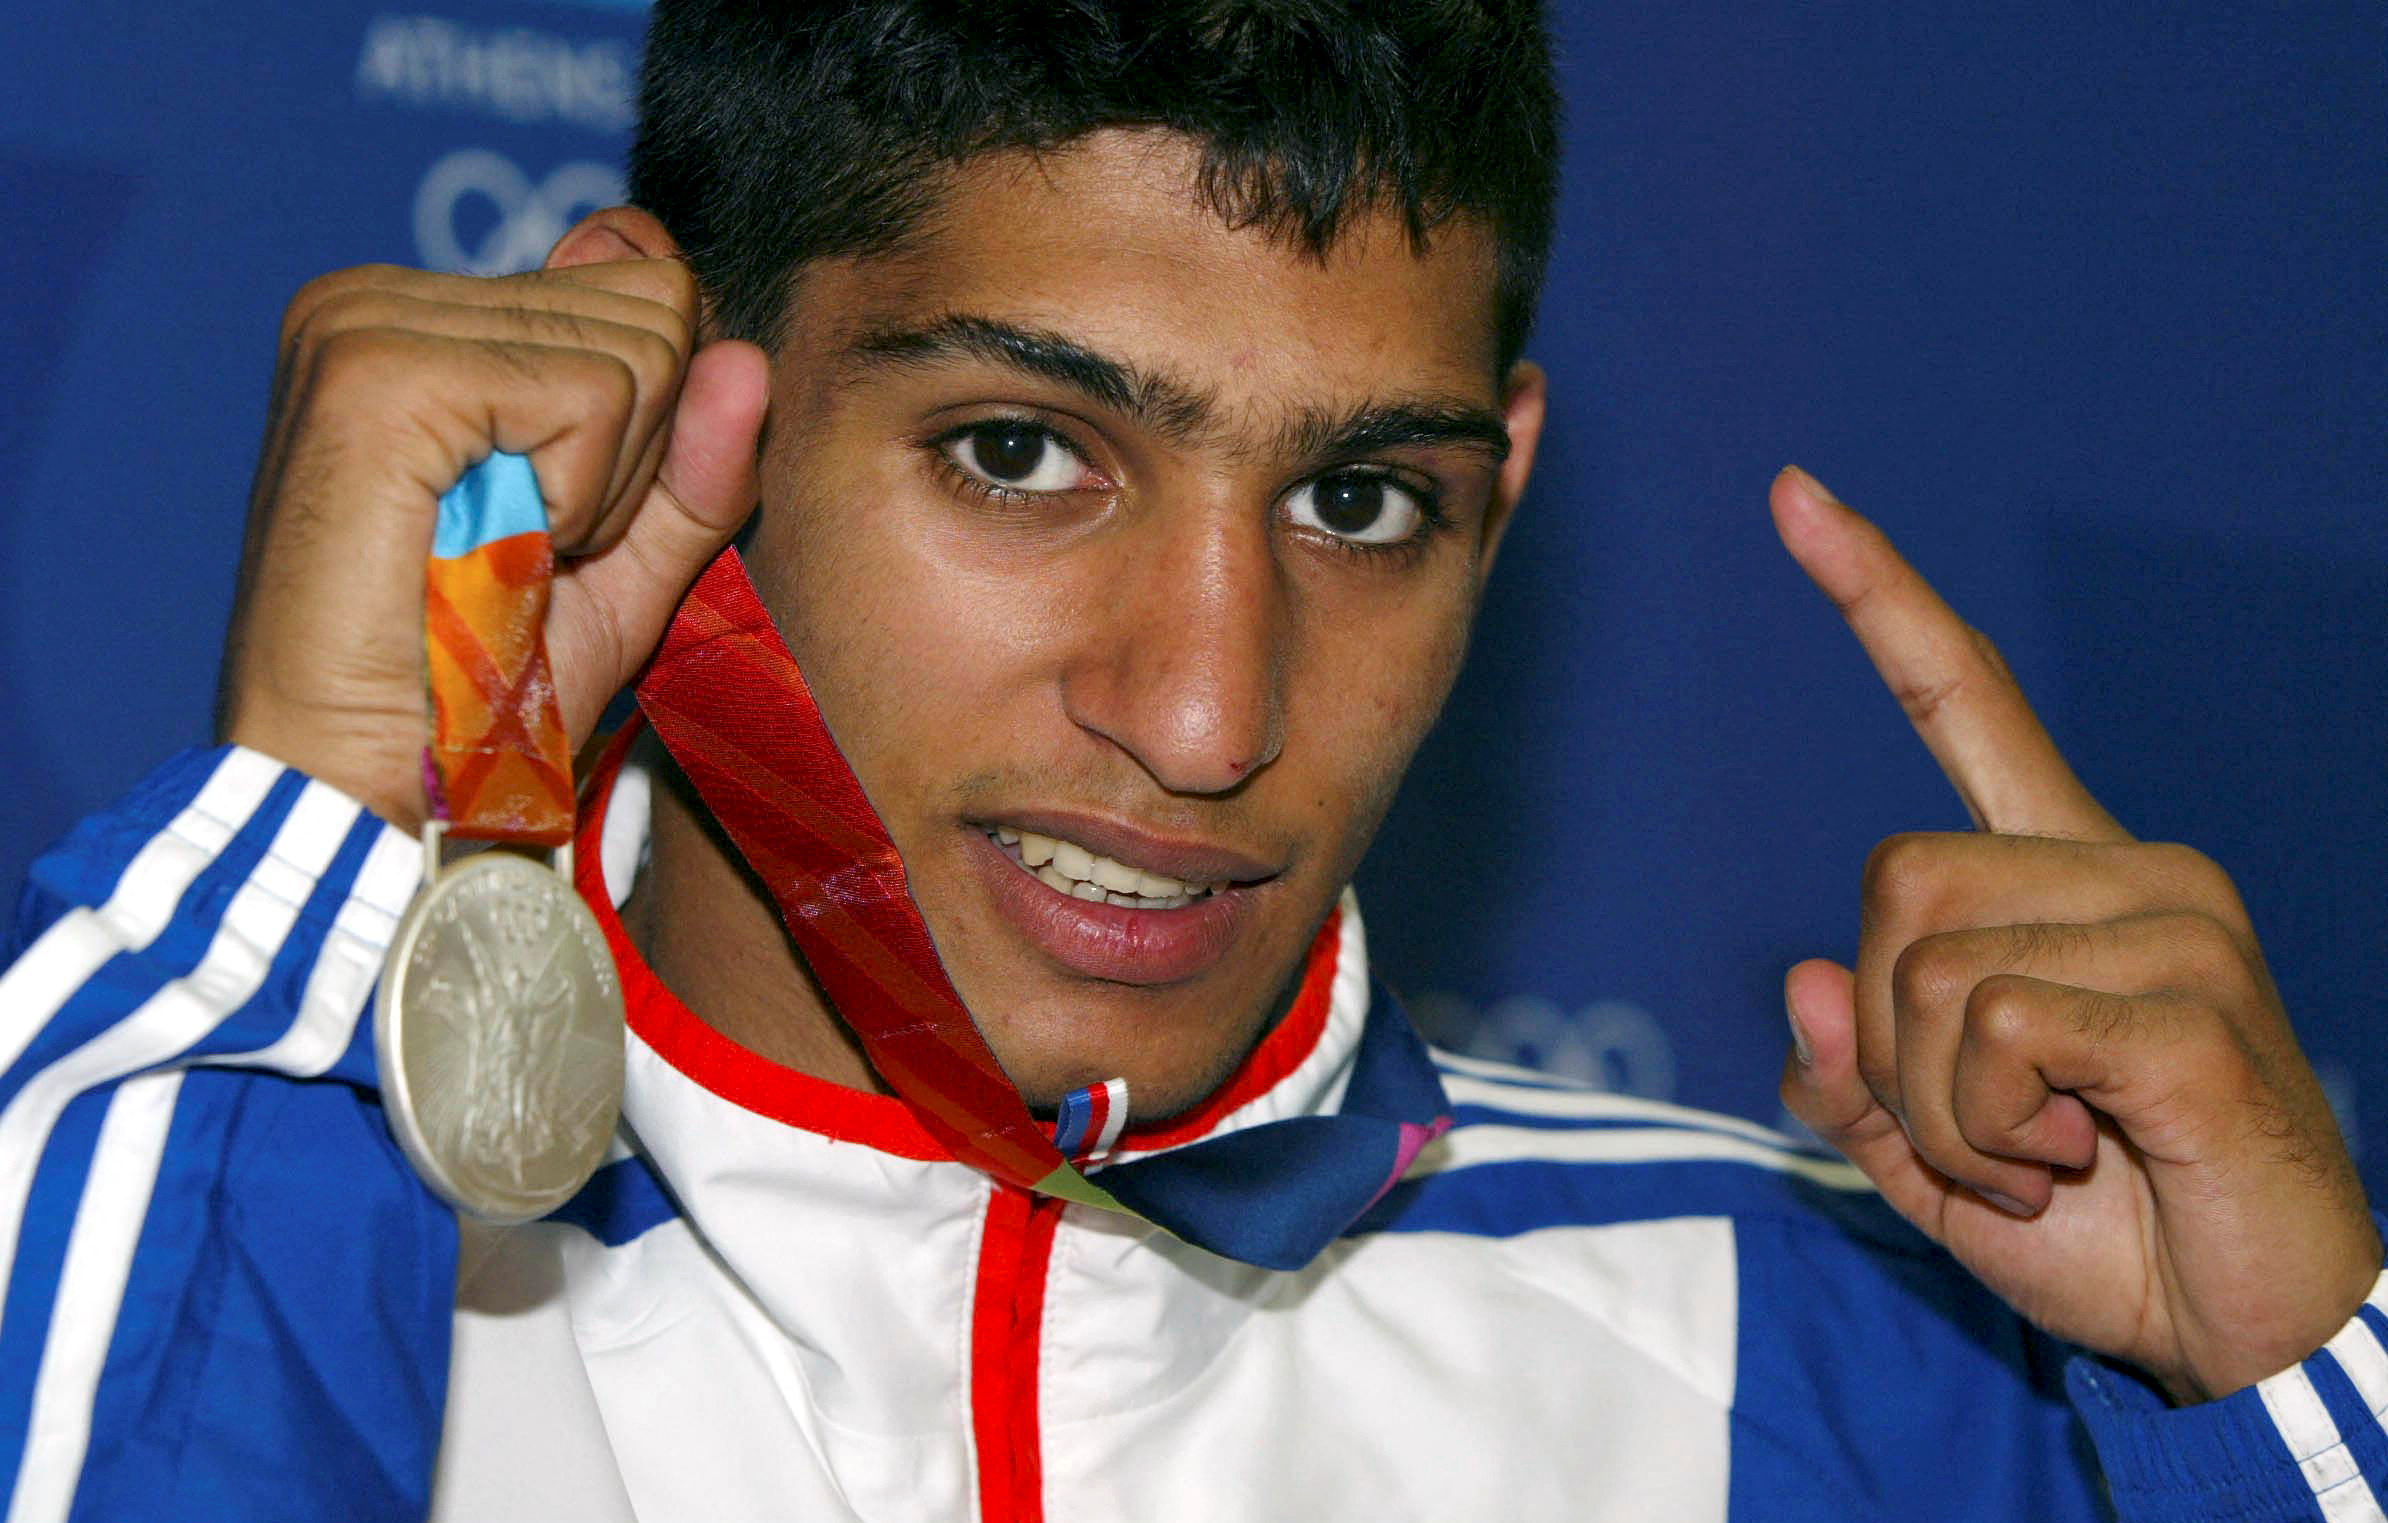 FILE PHOTO: Boxing - Olympics - Athens 2004 Olympic Games - Athens - 29/8/04  Amir Khan with the Olympic Silver Medal he won for Britain today  Action Images via Reuters/Richard Heathcote/File Photo